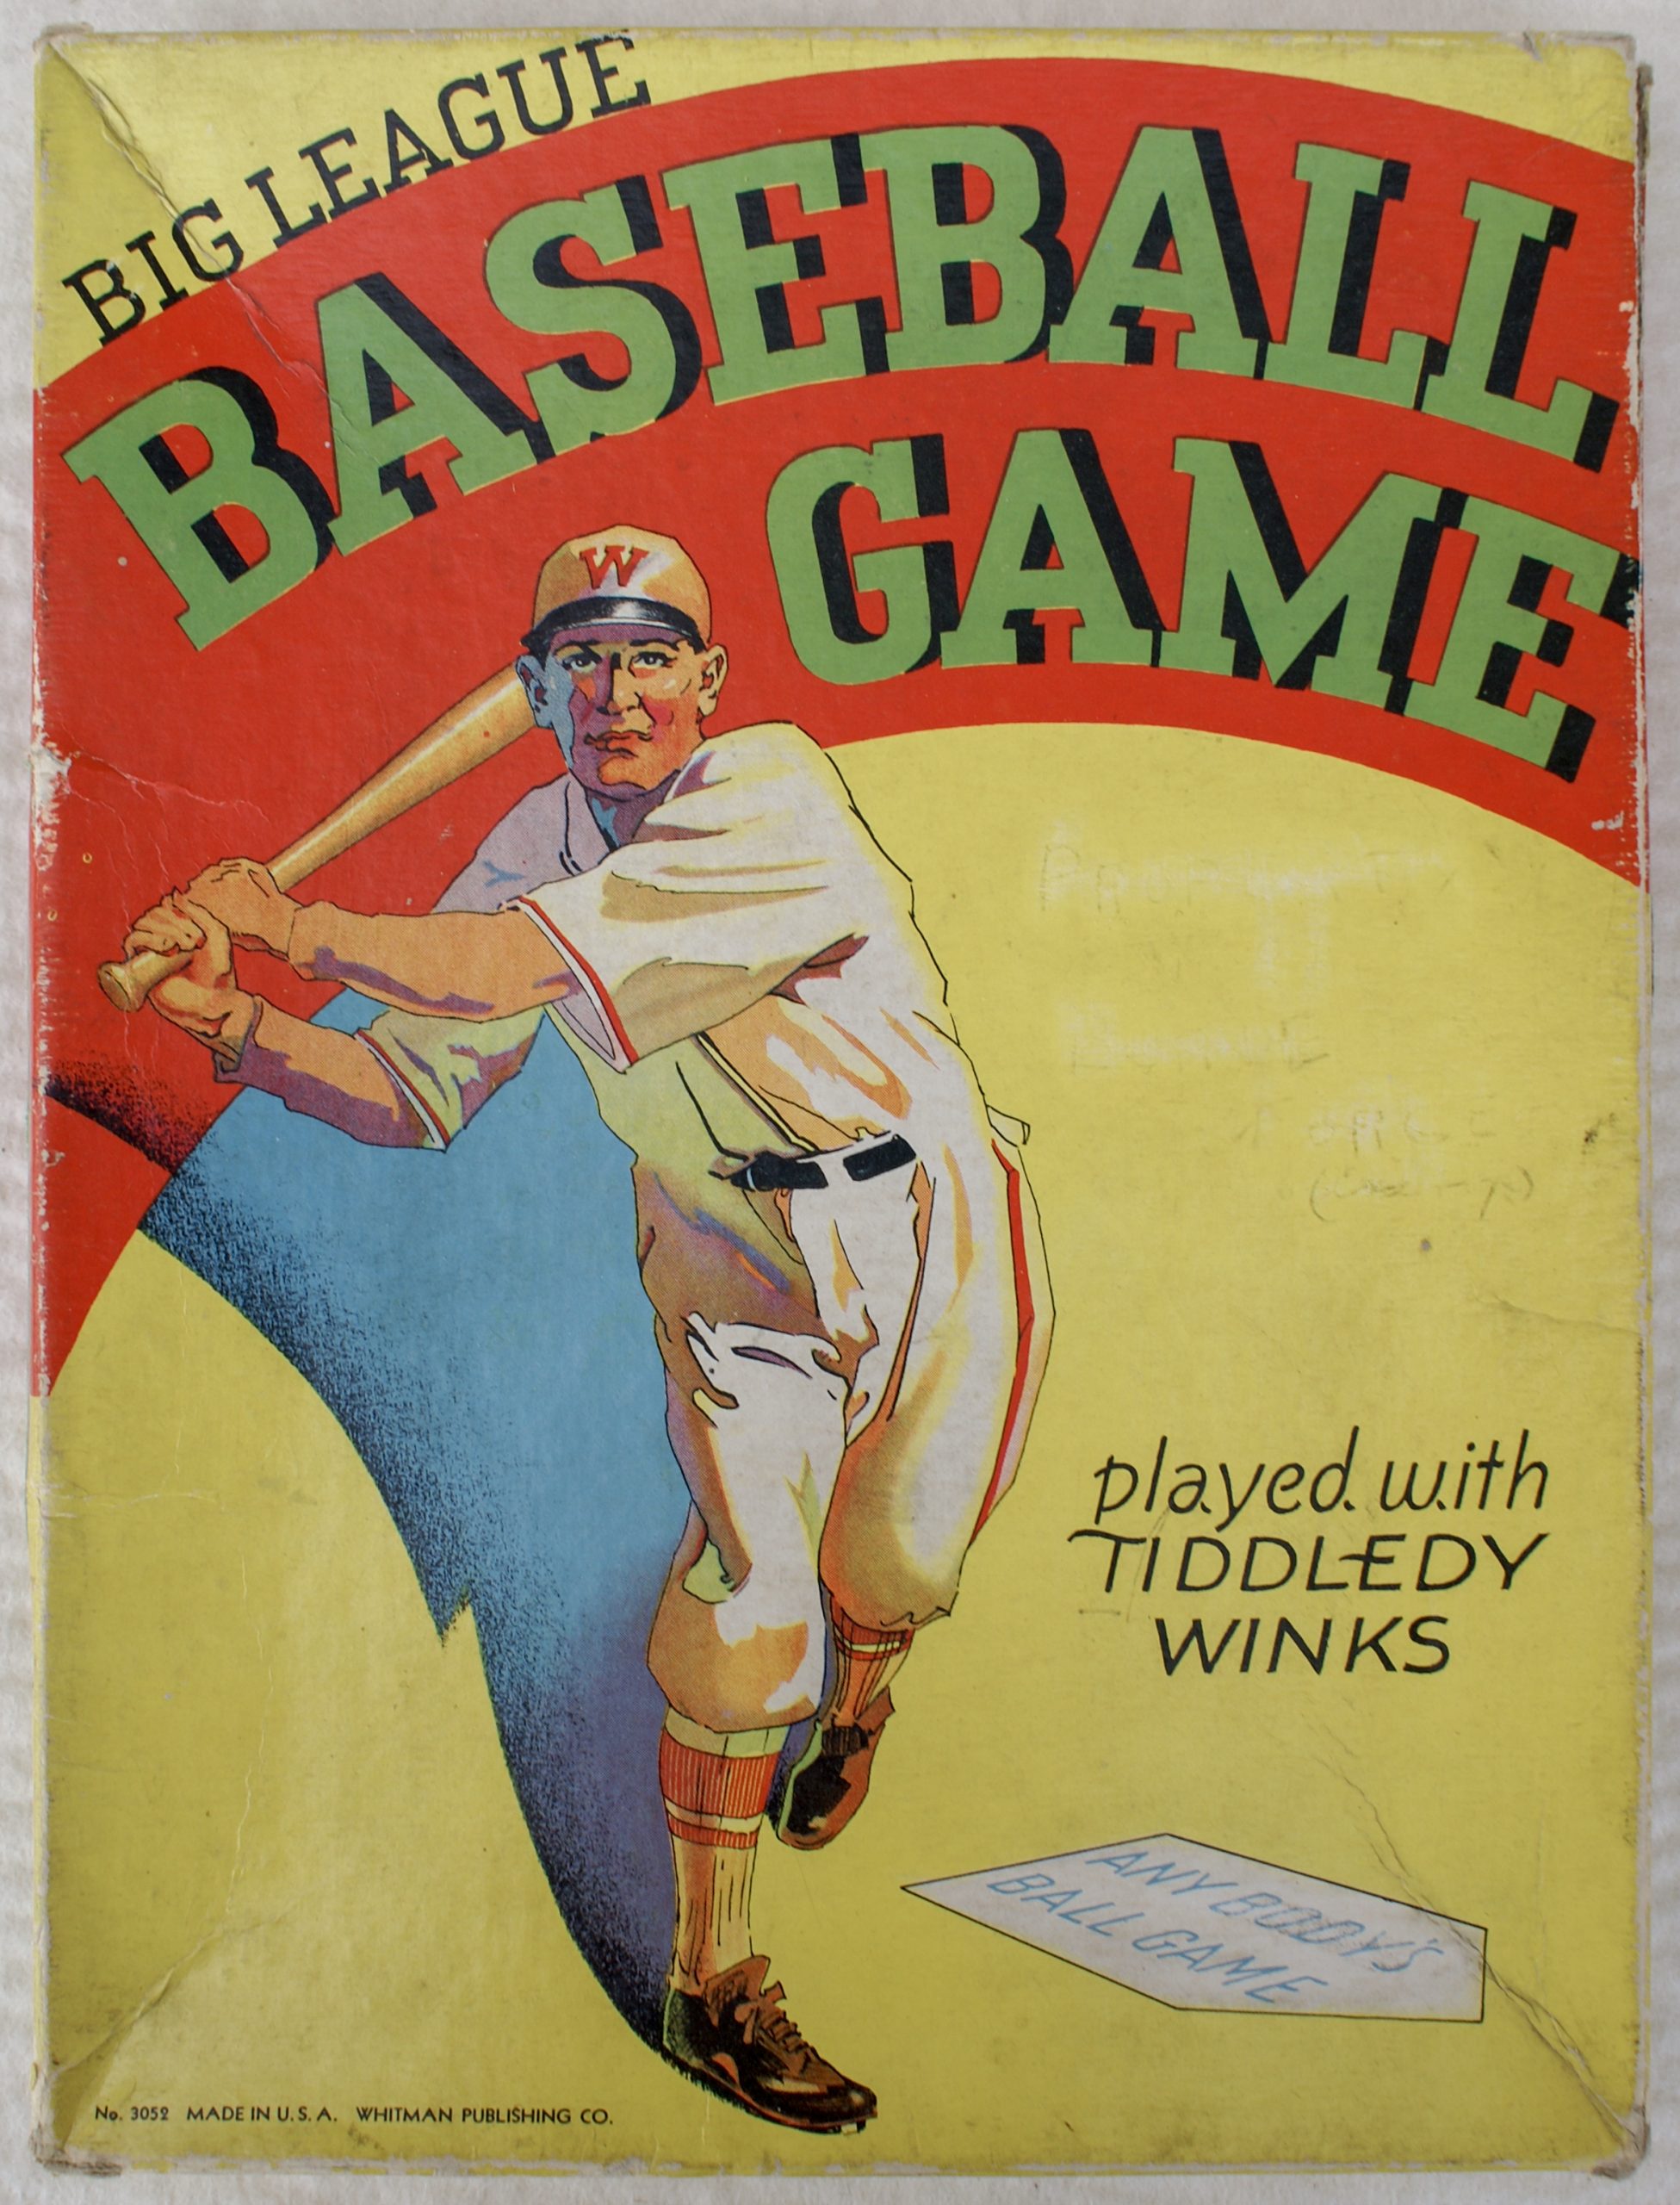 Tucker Tw ID • WHI-01 — publisher • Whitman — title • BIG LEAGUE BASEBALL GAME - played with TIDDLEDY WINKS